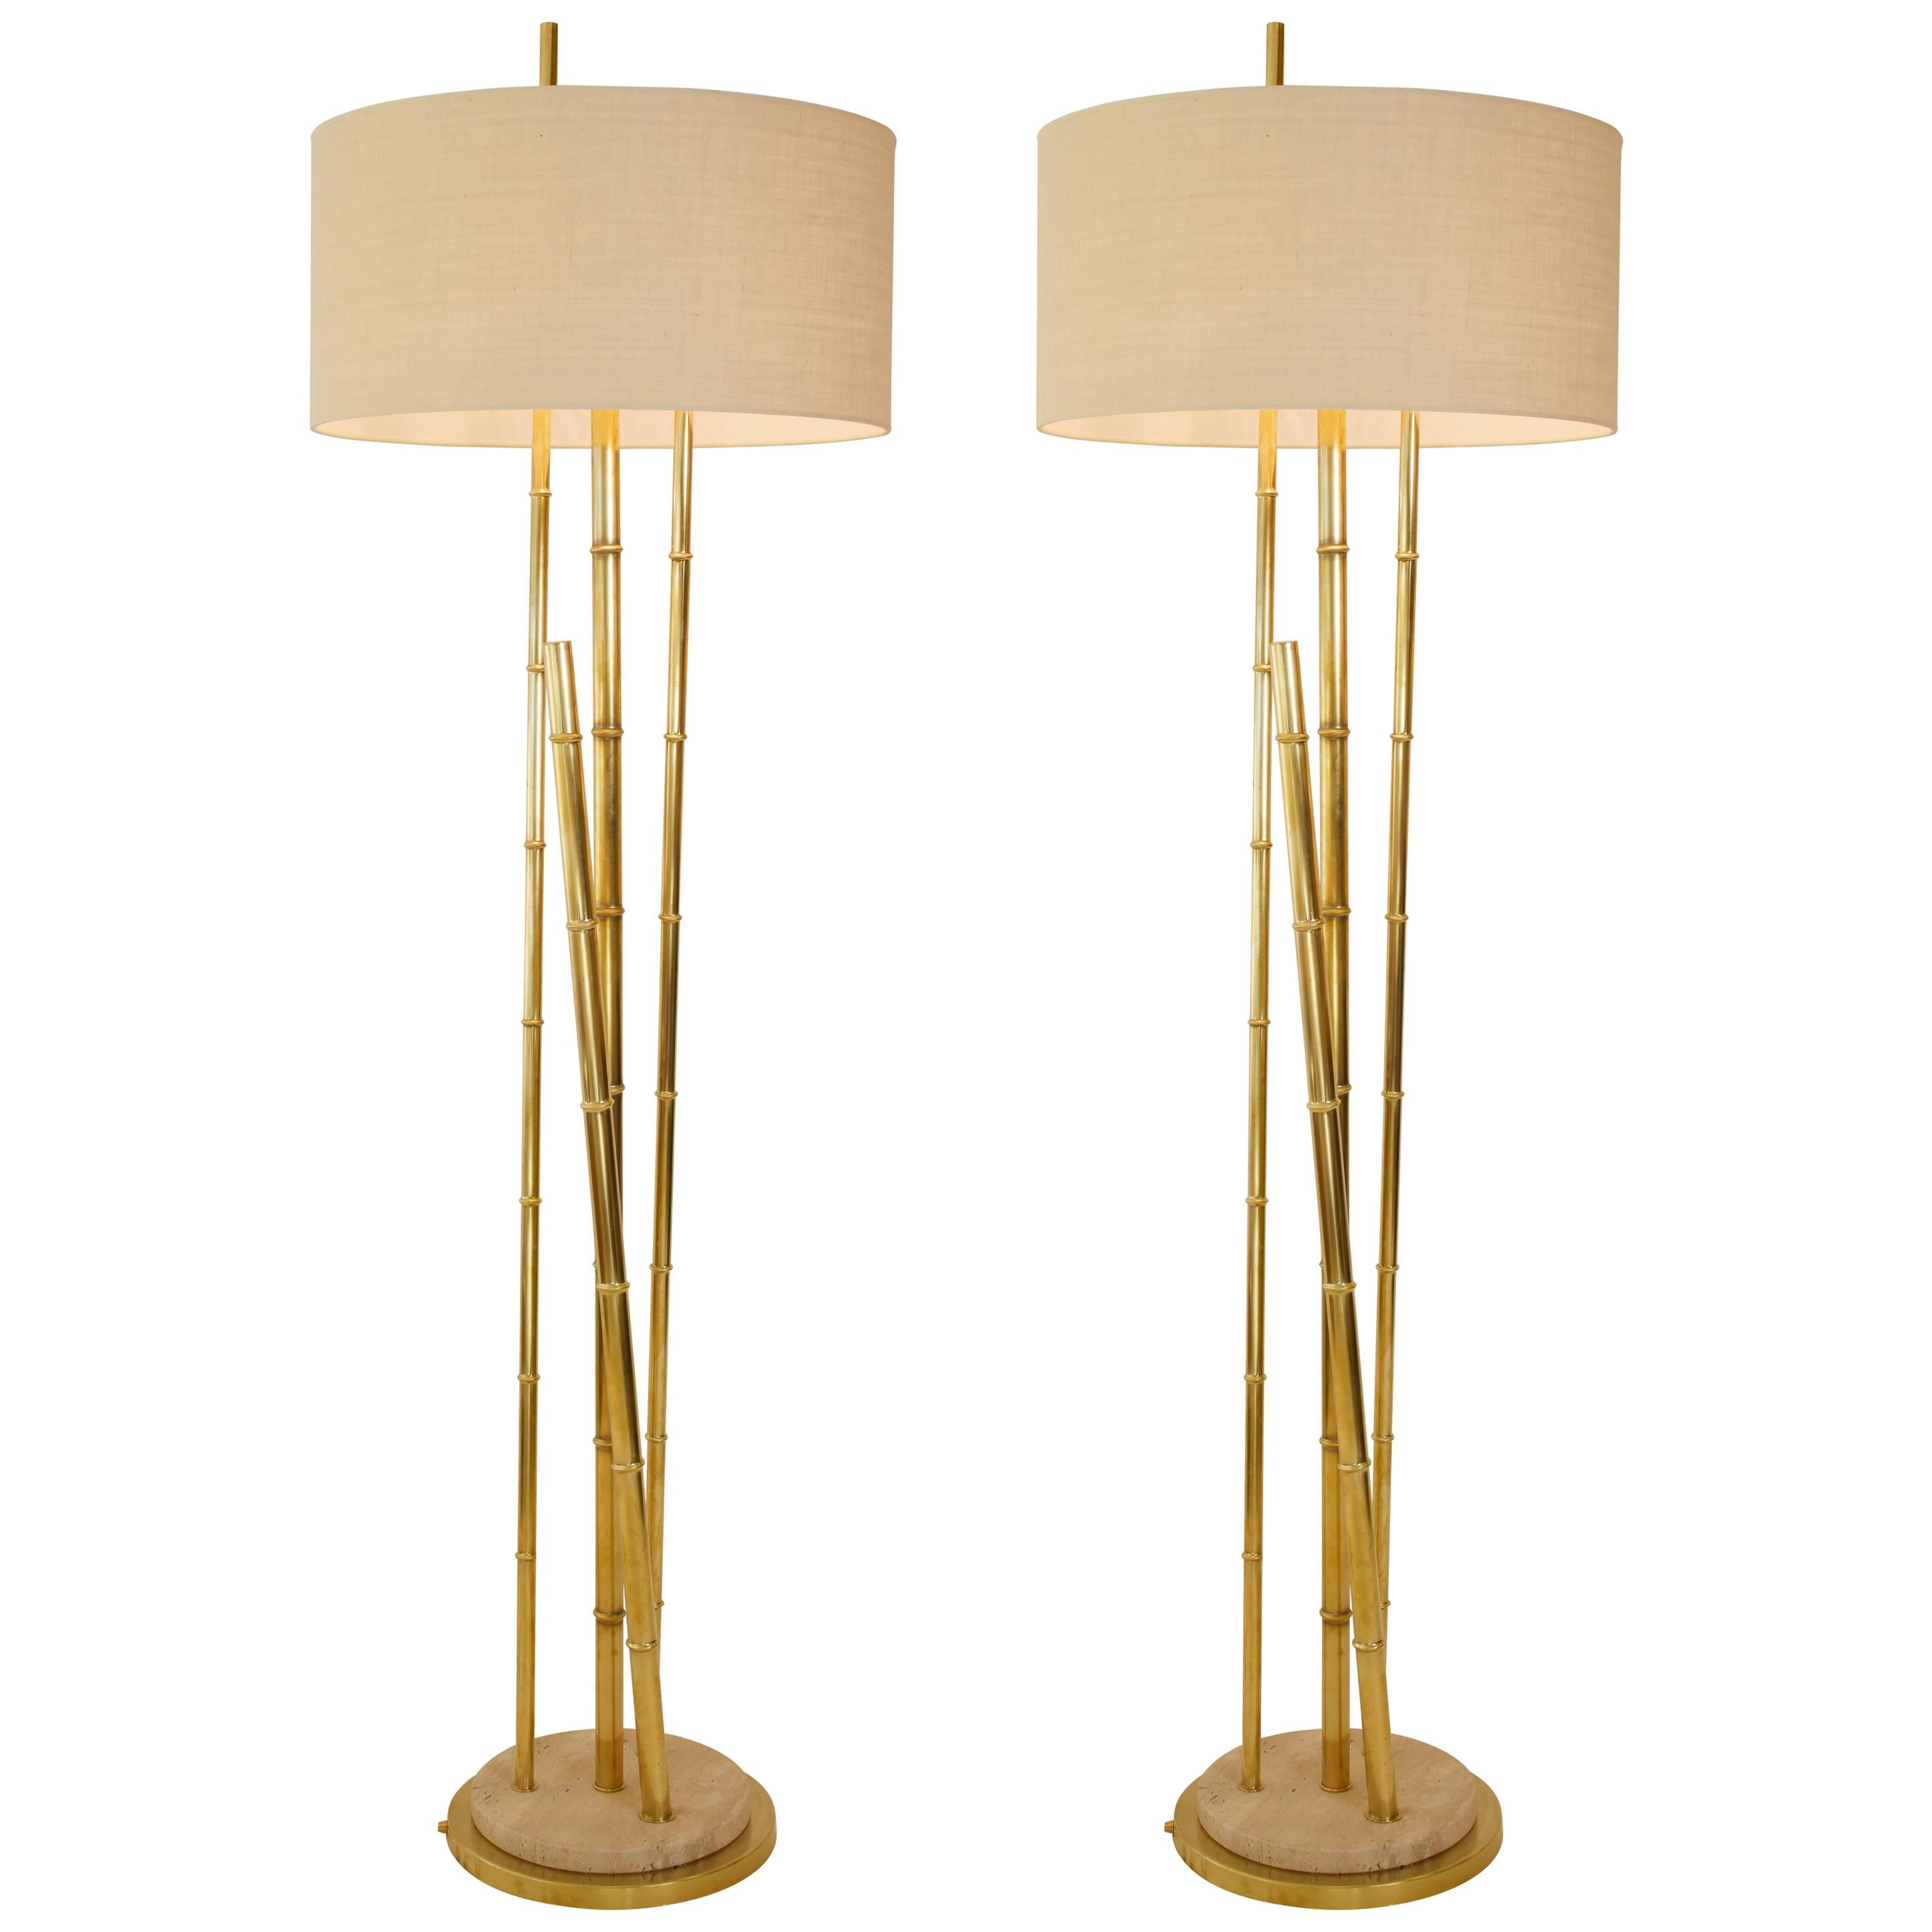 1970s French Pair of Brass Faux Bamboo Floor Lamps